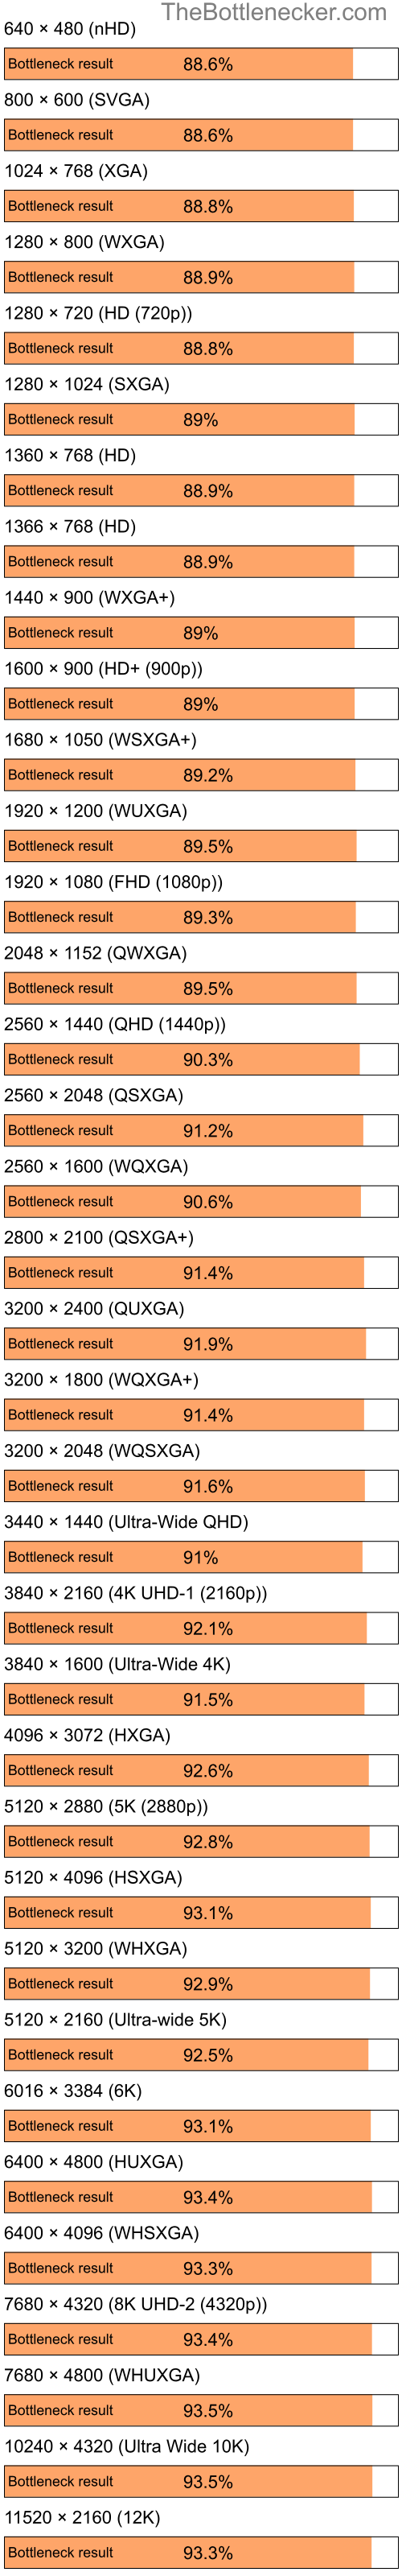 Bottleneck results by resolution for Intel Pentium 4 and AMD Radeon 9200 in General Tasks